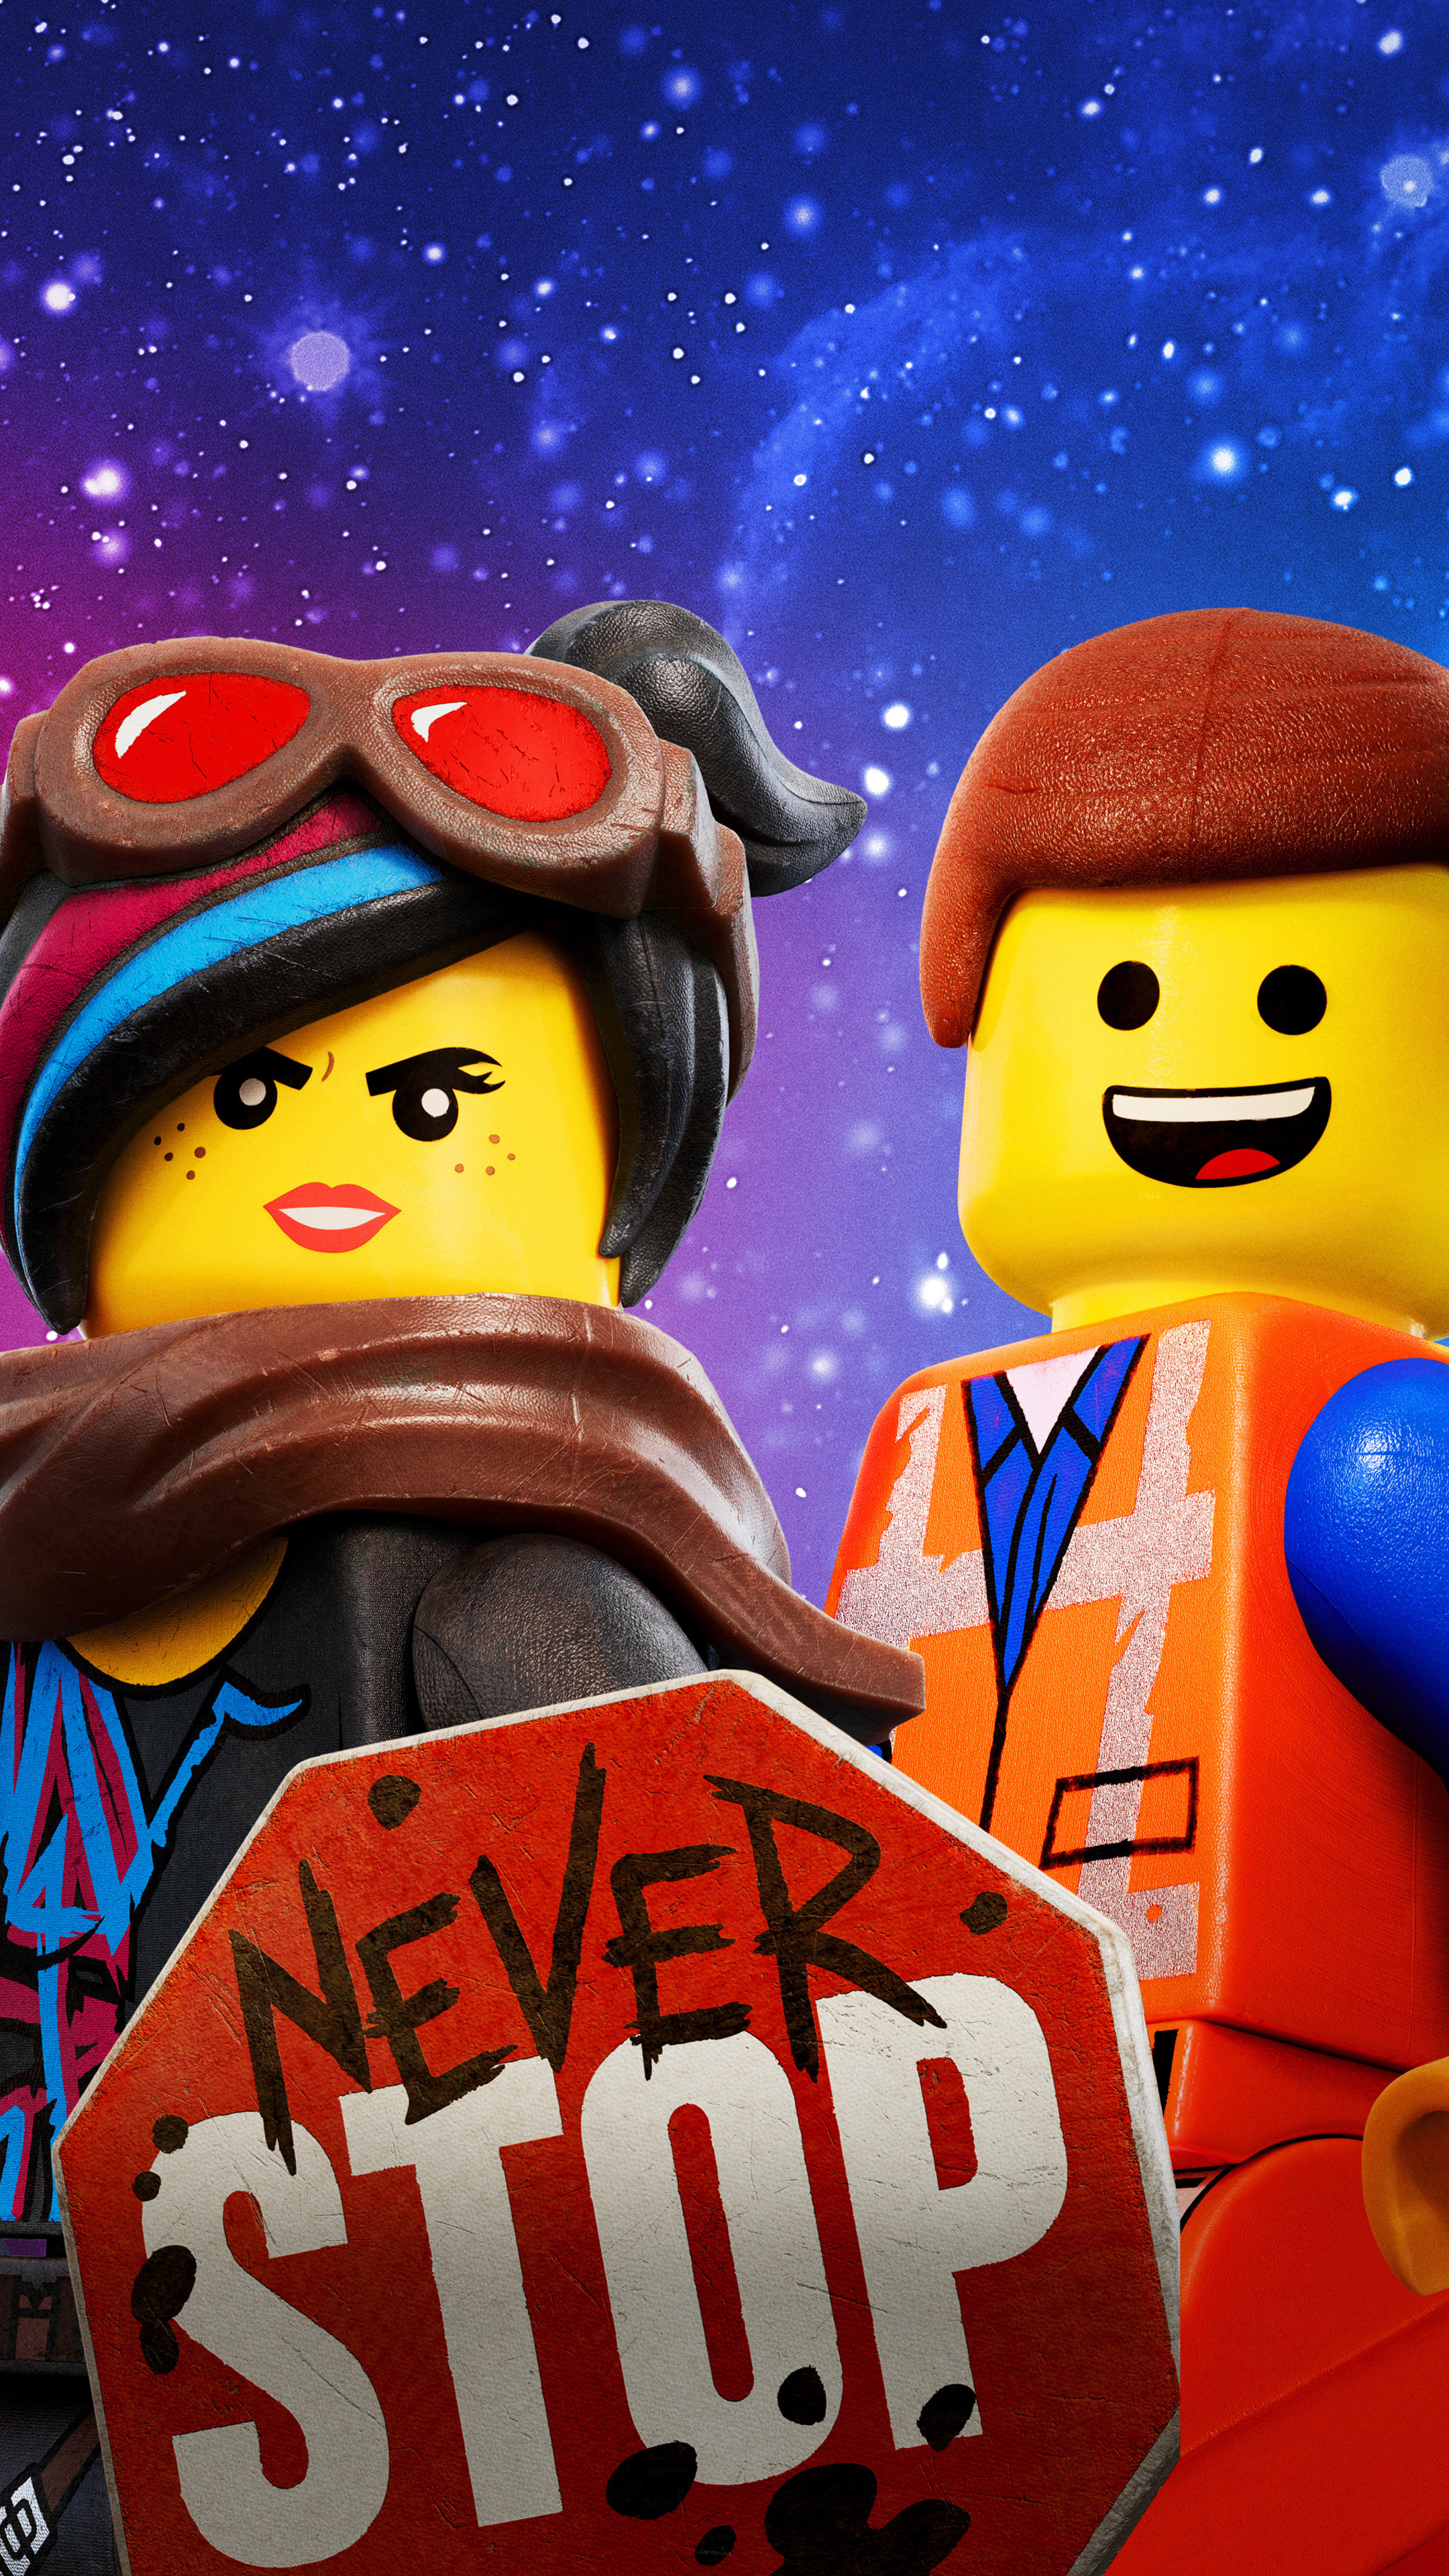 Lego movie sequel, Creative animation, Action-packed adventure, Hilarious comedy, 2160x3840 4K Phone